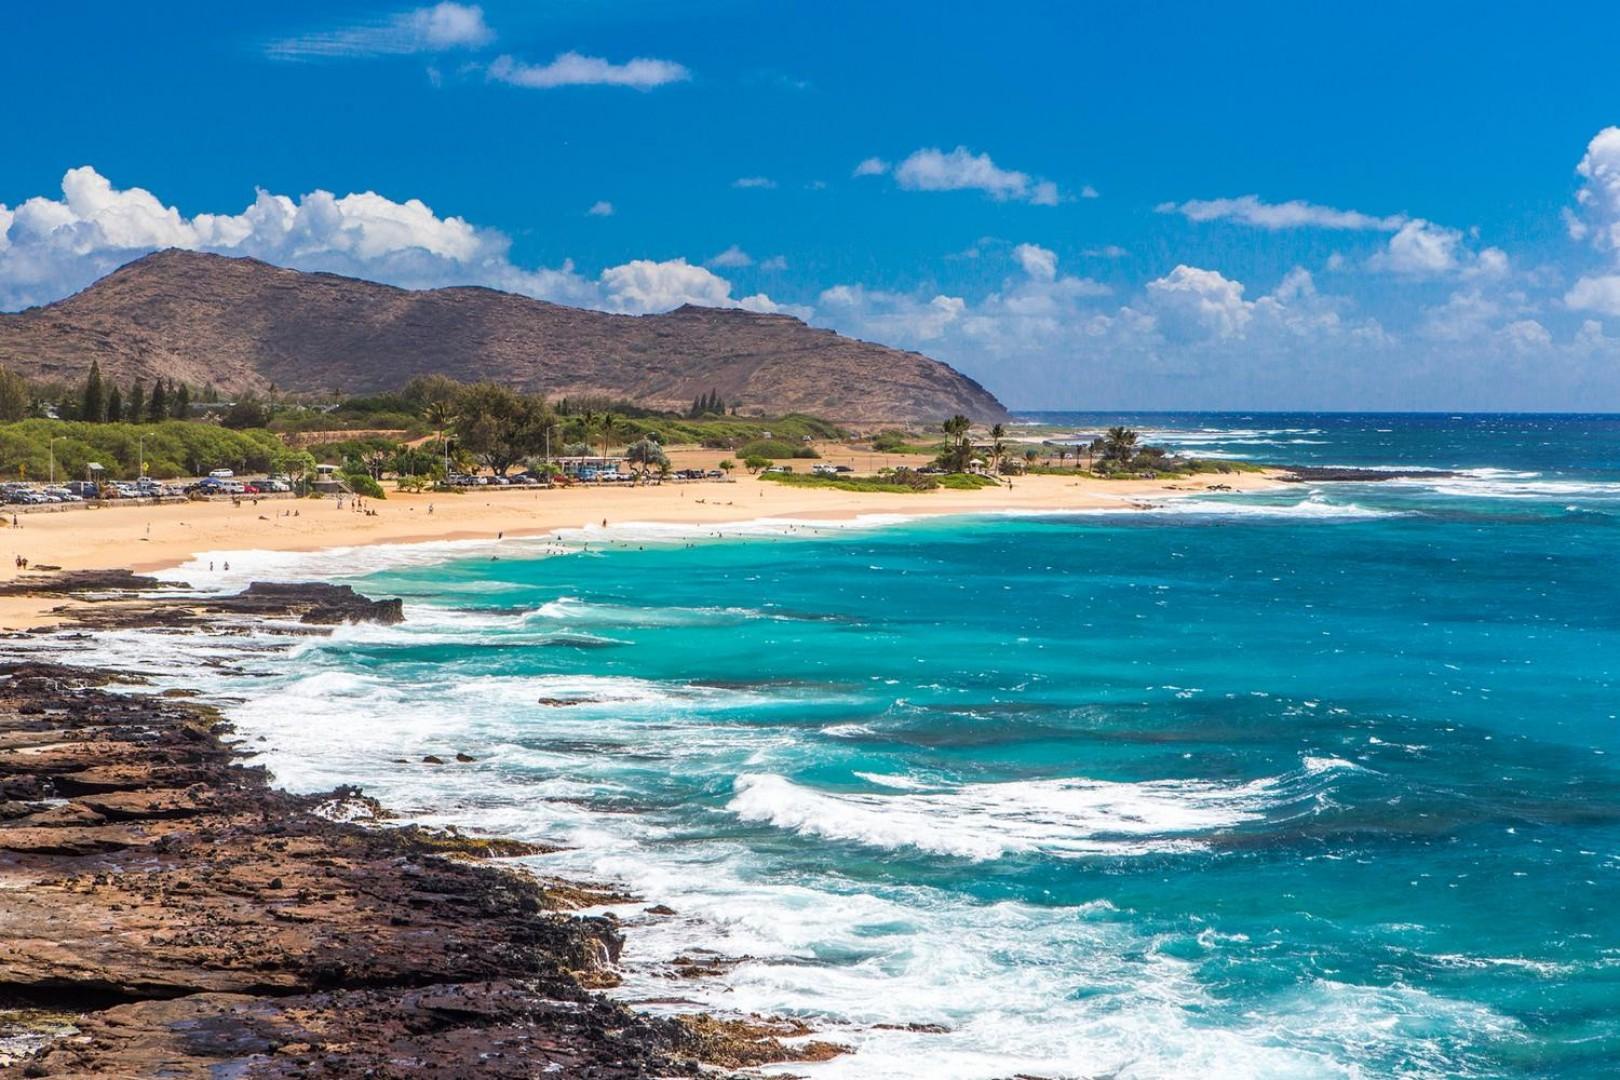 Honolulu Vacation Rentals, Hale Laulea - Just a short drive to the famous Sandy Beach!